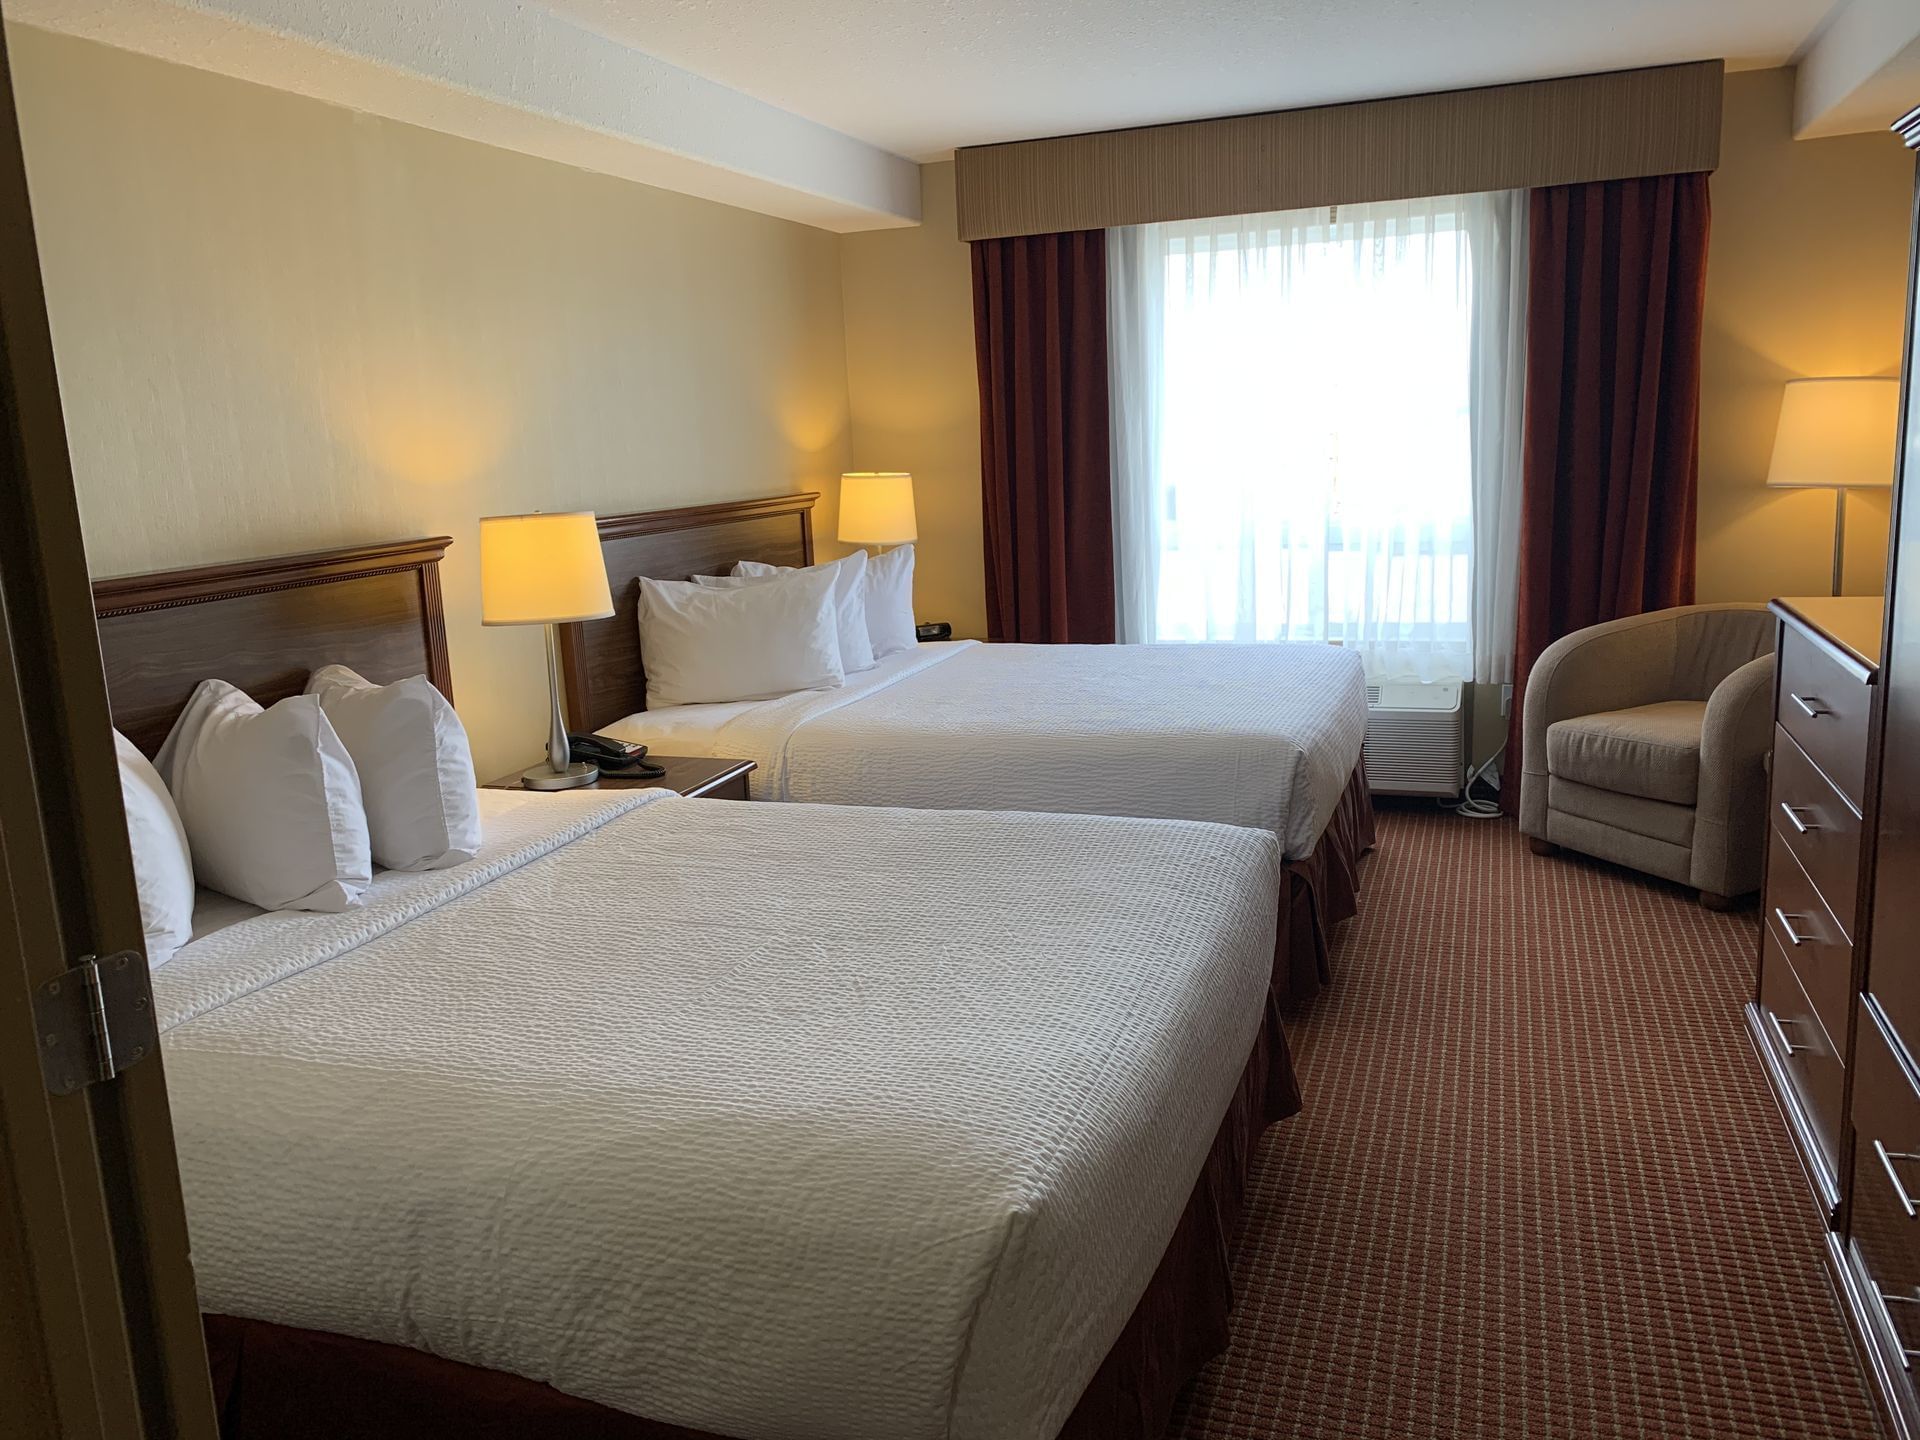 Lounger & nightstands by beds in Extended Stay Suite - 2 Queens at Merit Hotel & Suites